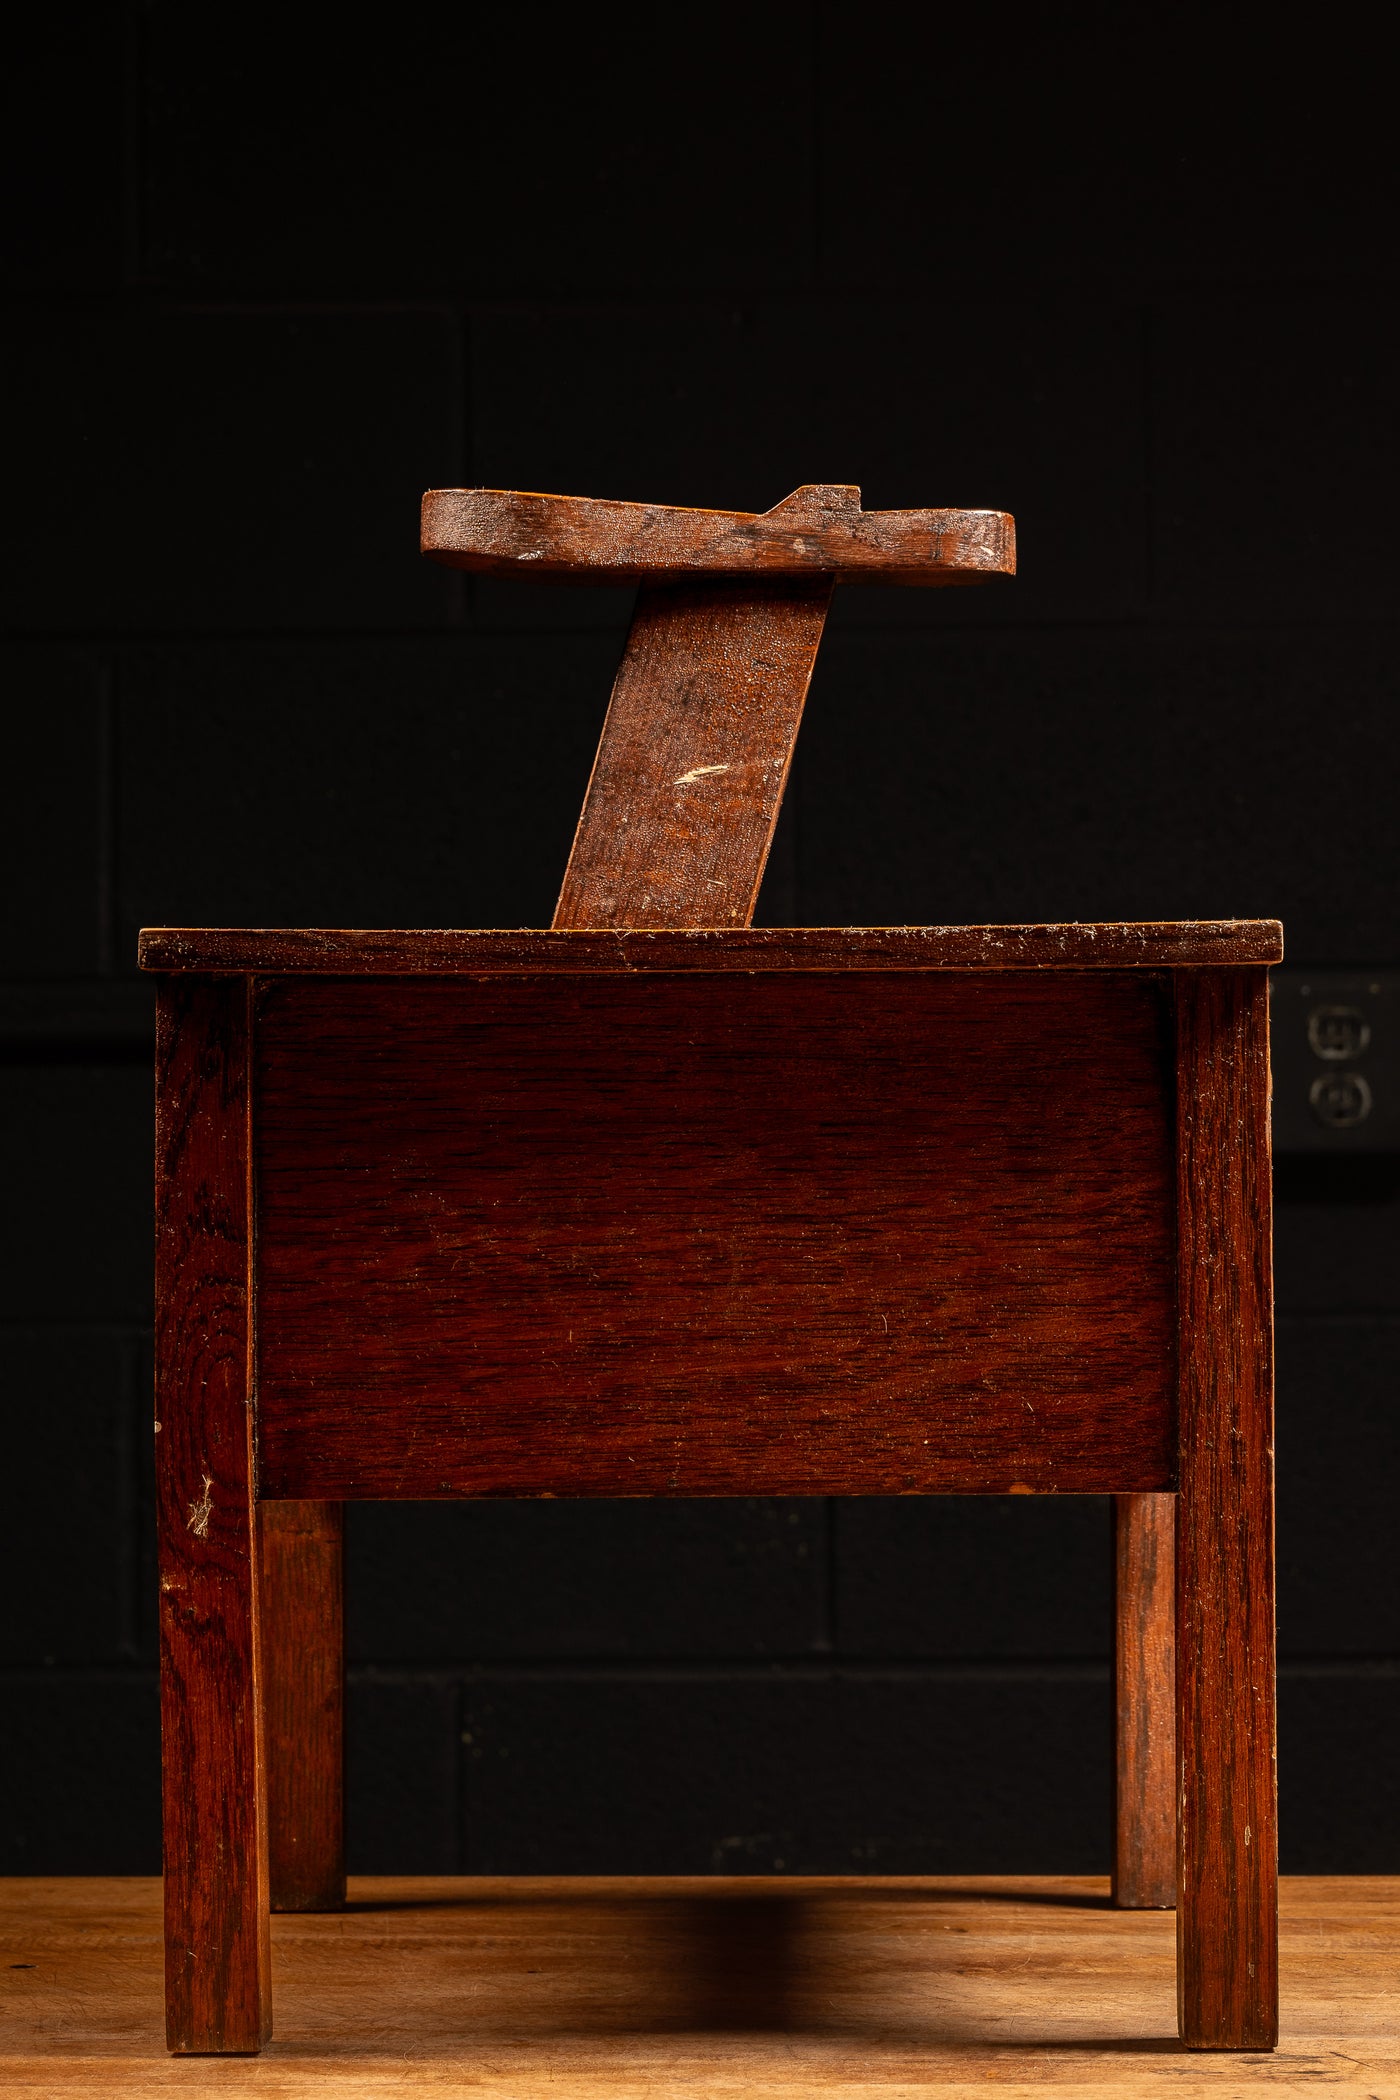 Early Wooden Shoe Shine Stand